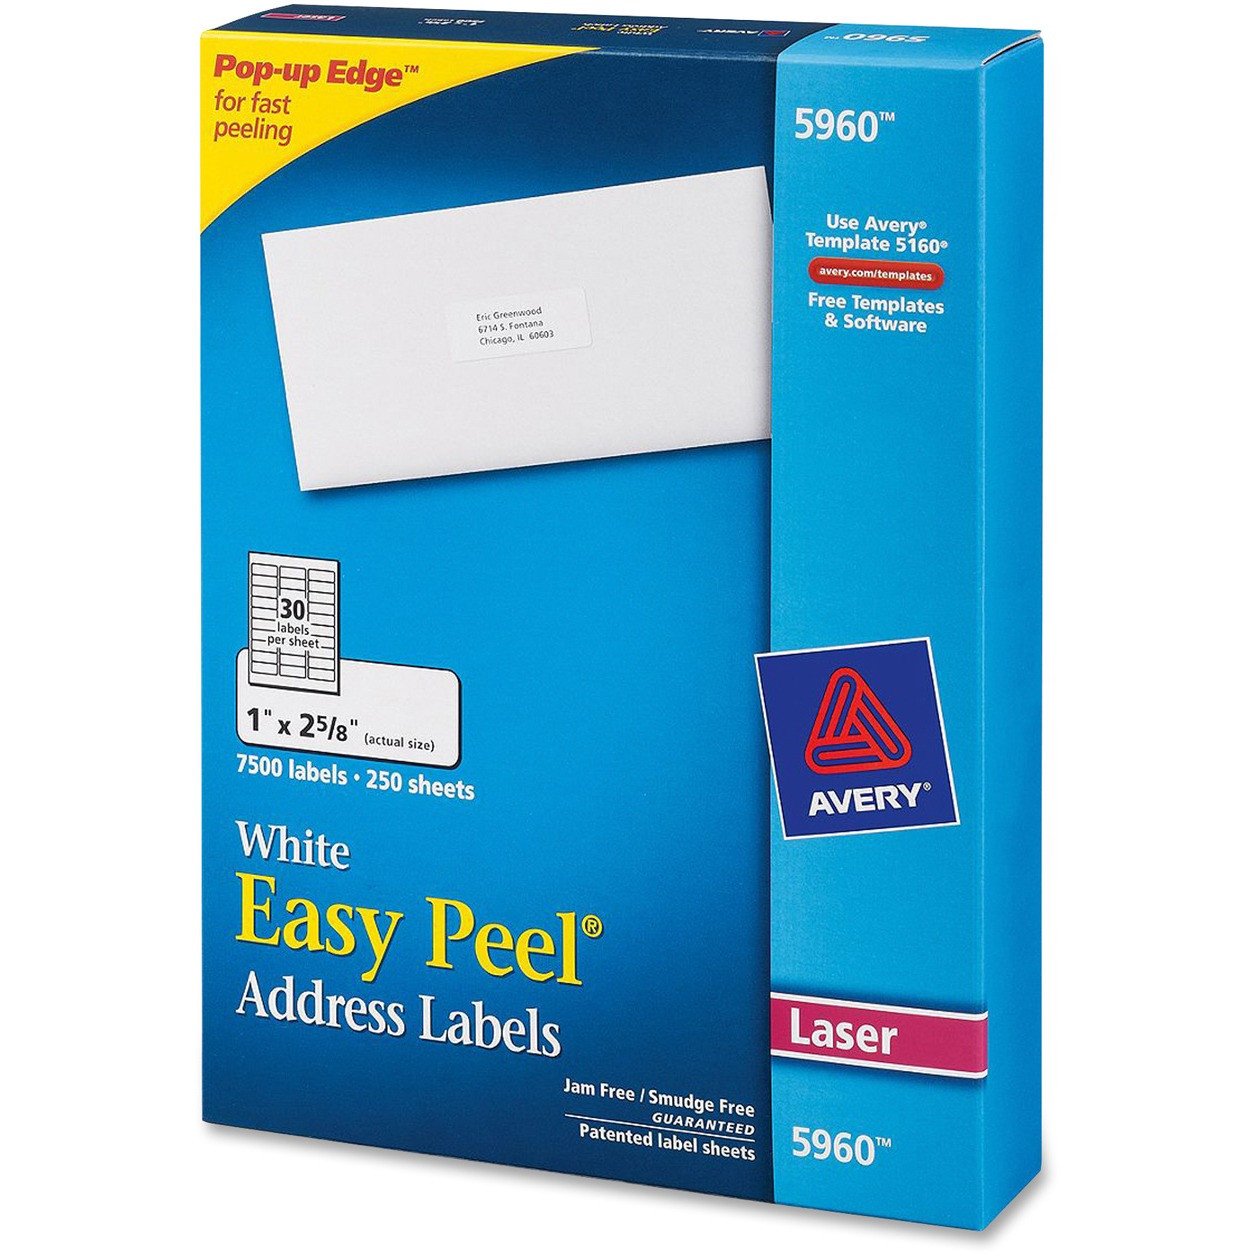 Avery Label Template 5960 Avery 5960 Easy Peel Address Label Permanent Adhesive 1